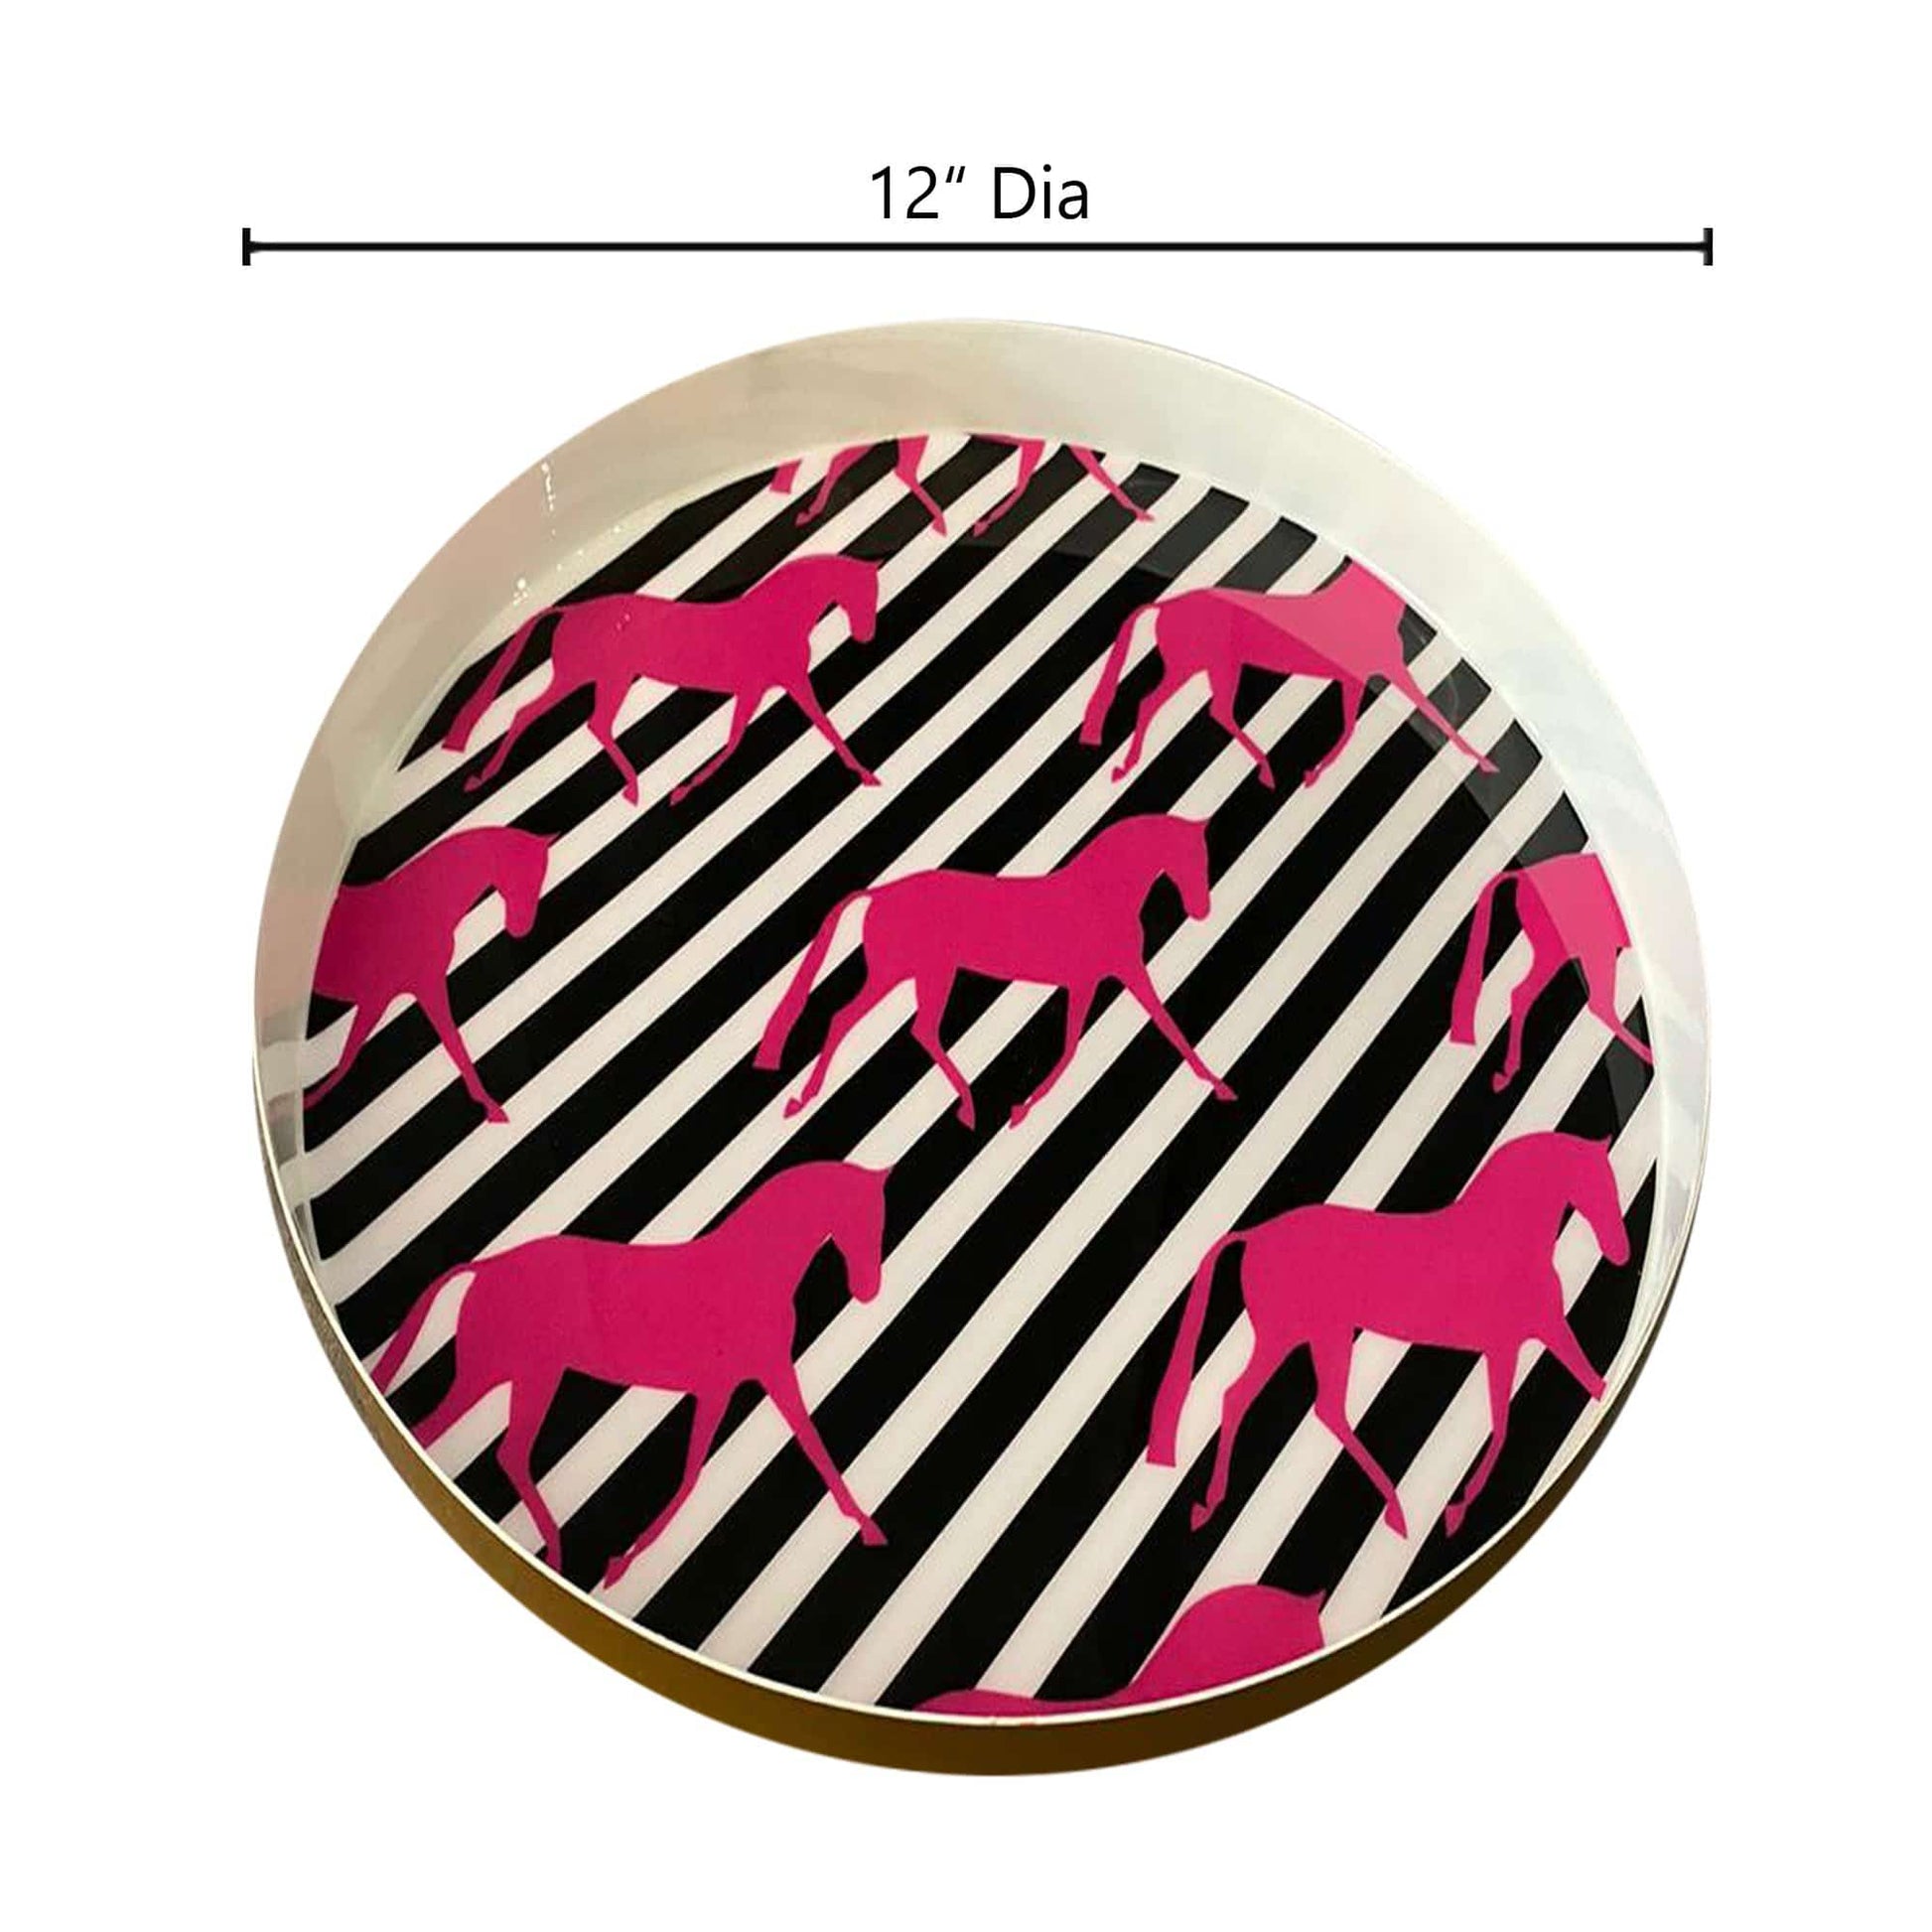 Home Digital Art Pink horse Serving Tray (12" inches) - The Decor Circle